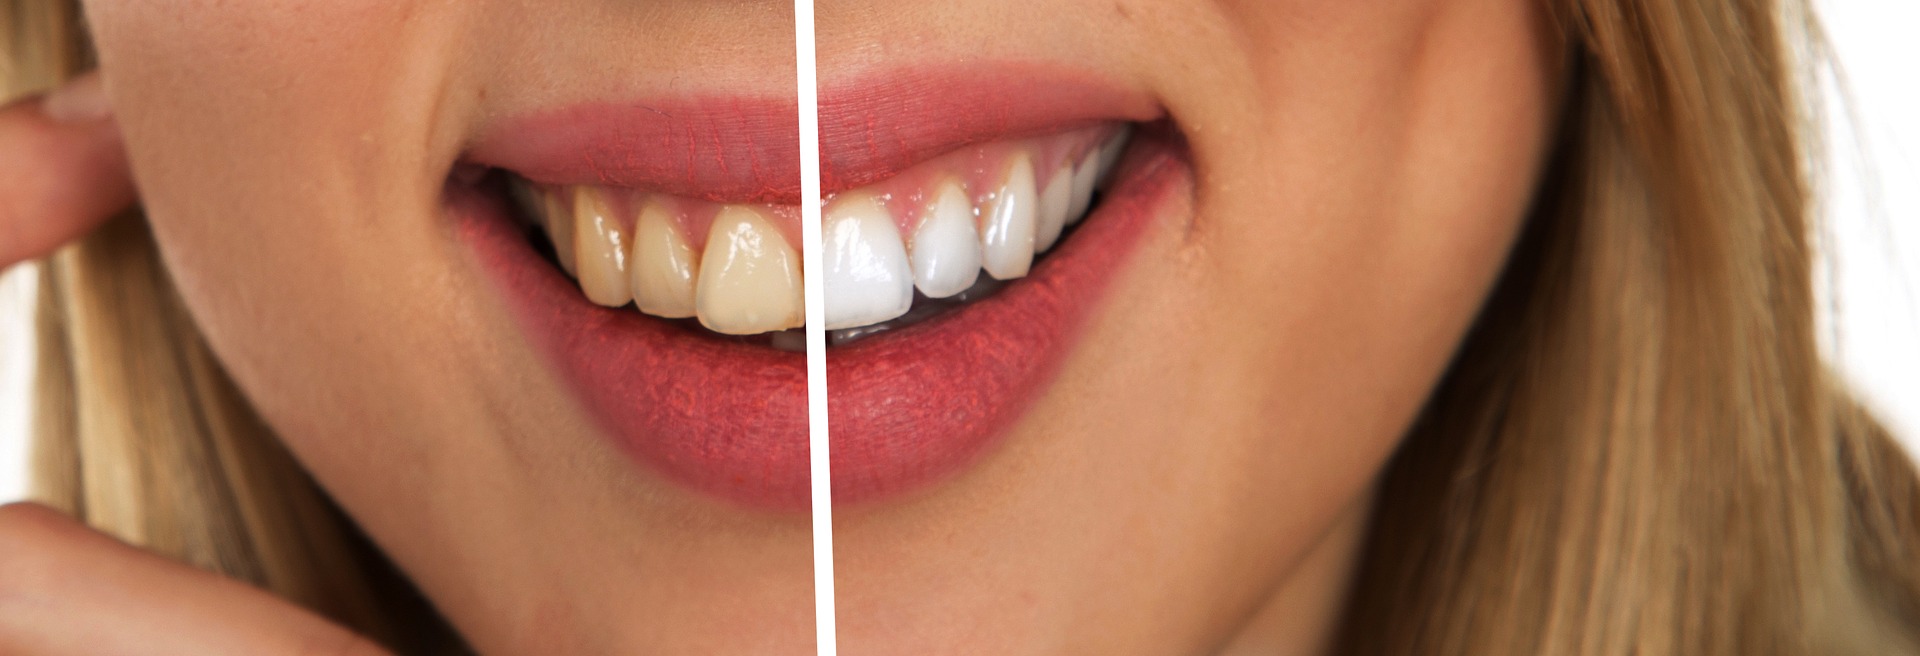 Before and after photos of whitened teeth